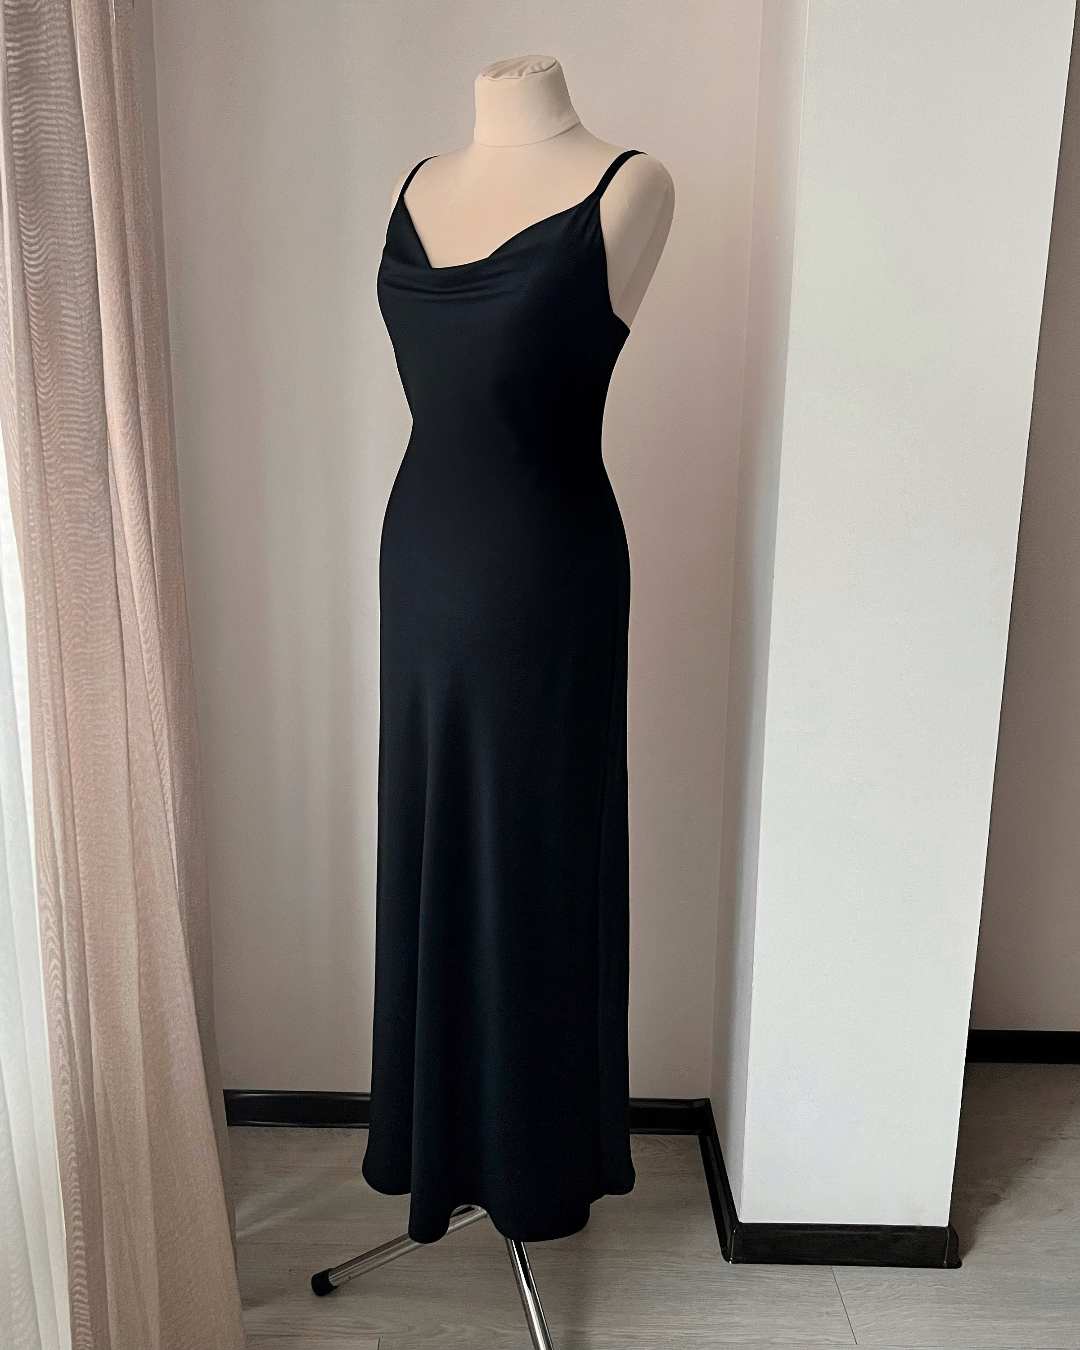 a dress on a mannequin in a room